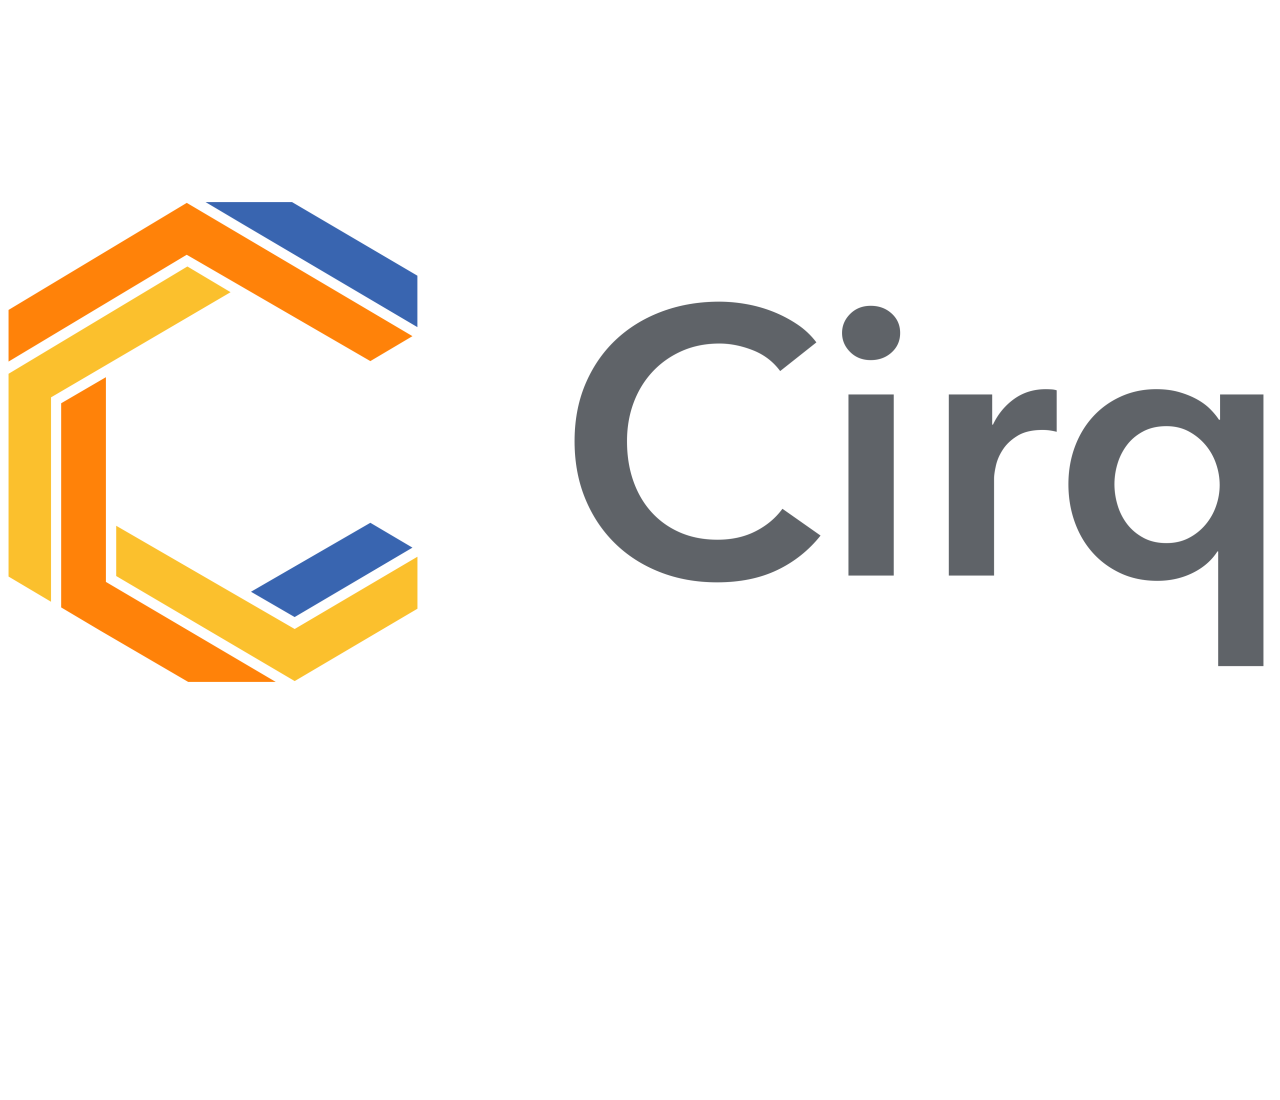 Cirq and Pasqal Collaboration To Expand Quantum Computing Ecosystem